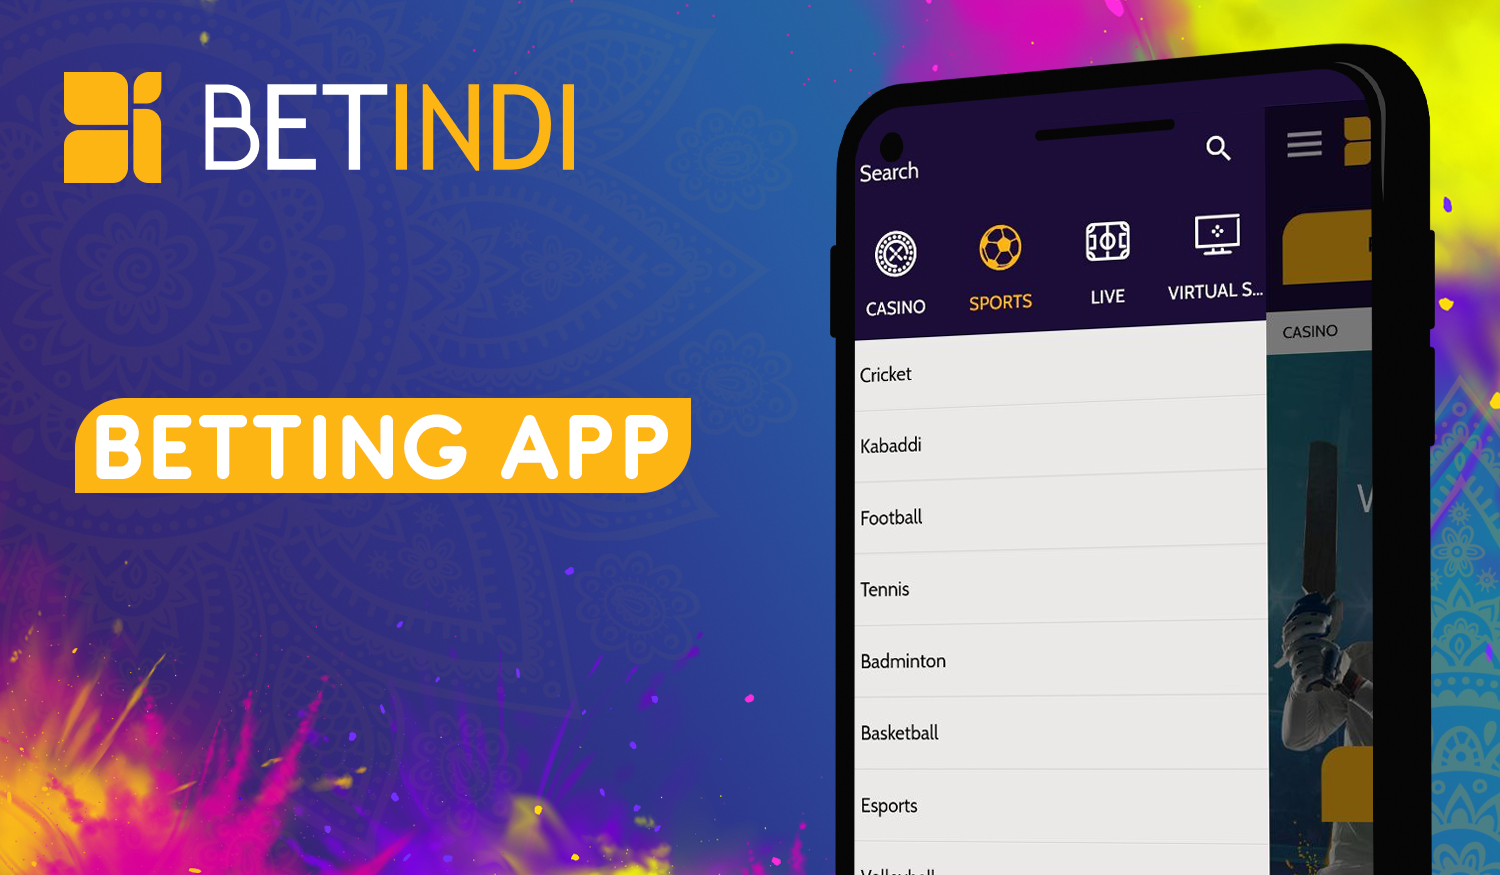 How to download, install and use the Betindi mobile app 